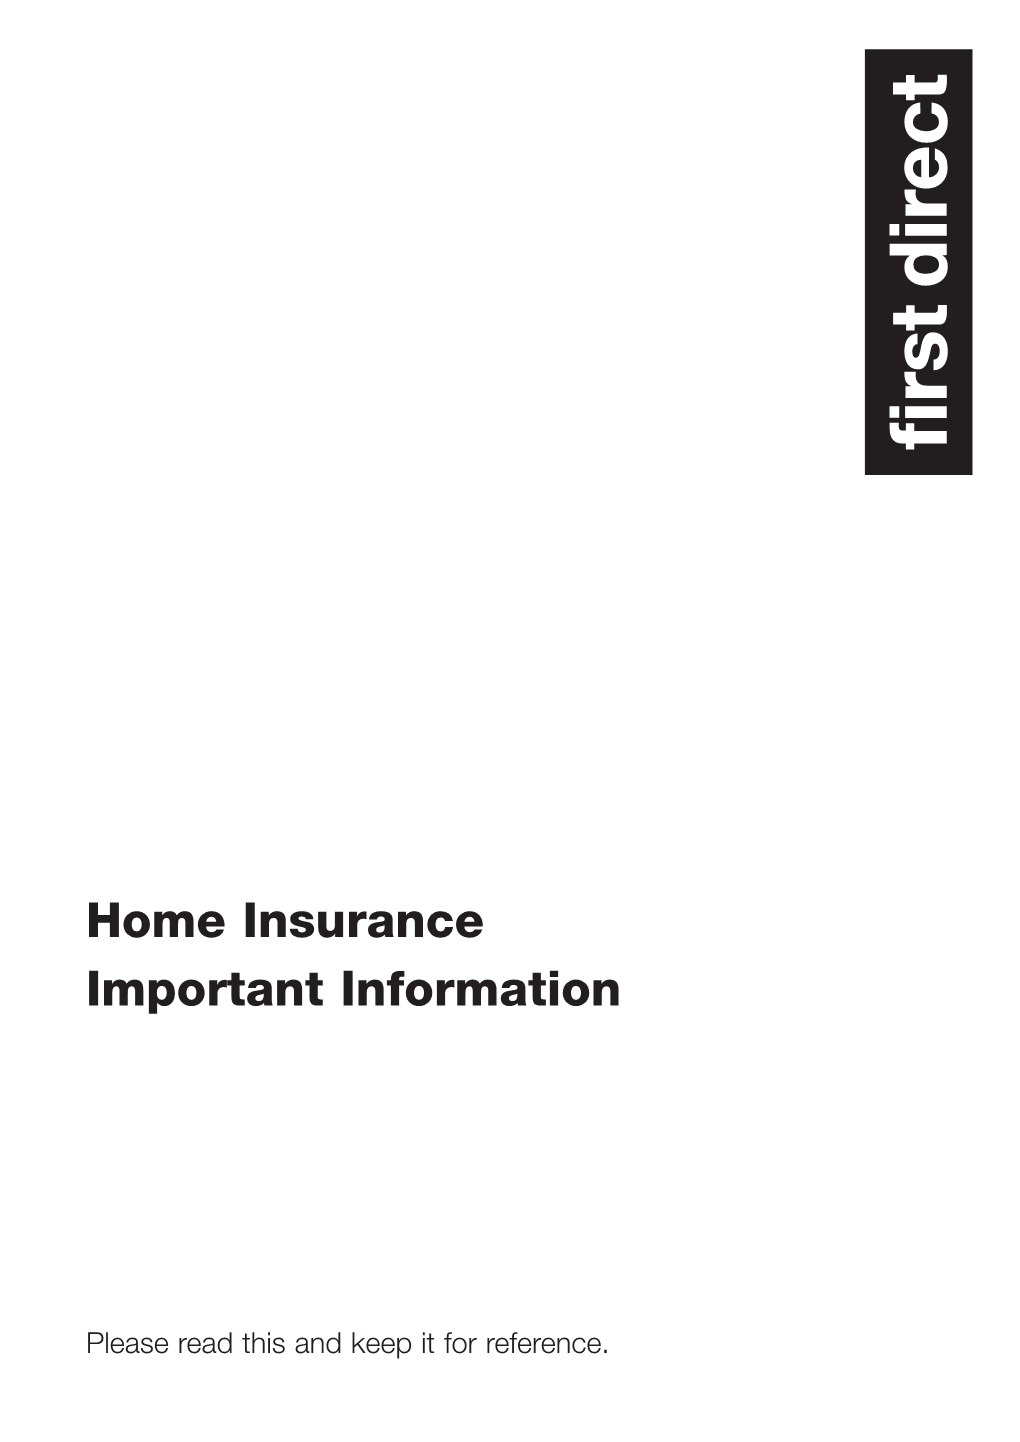 Home Insurance Important Information